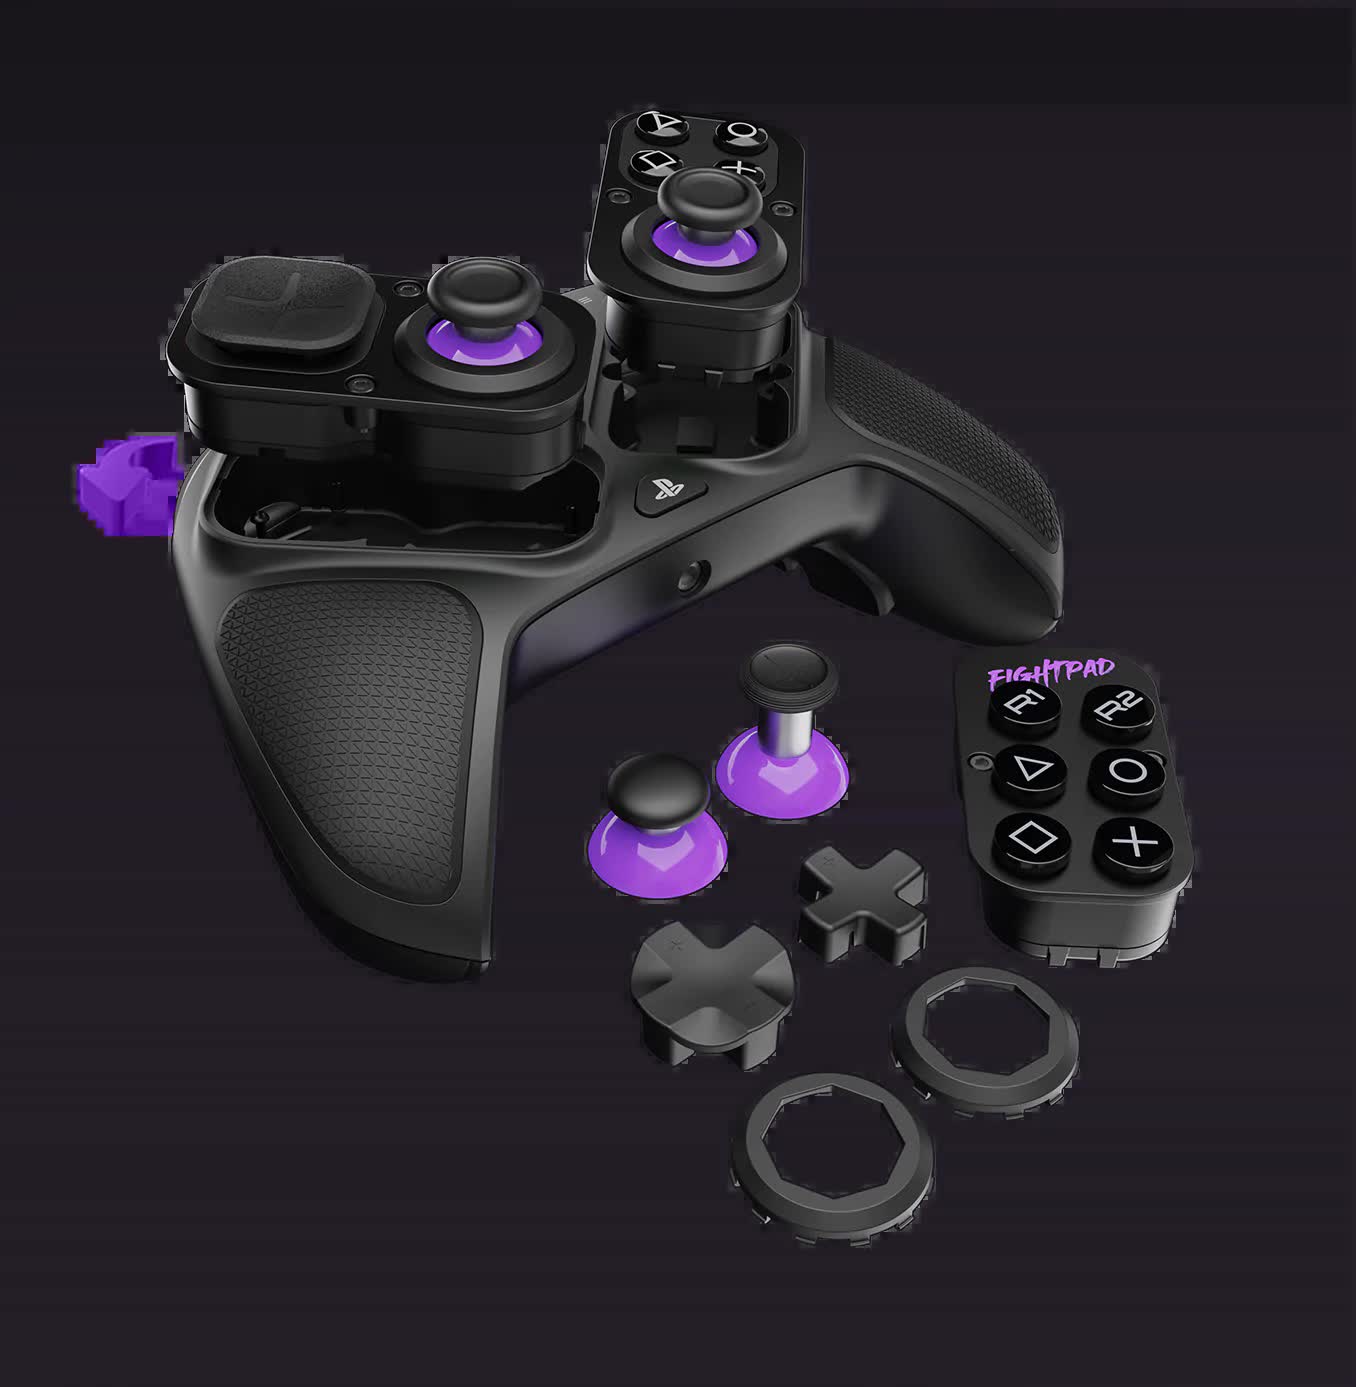 The BFG Pro PC/PlayStation modular controller is incredibly